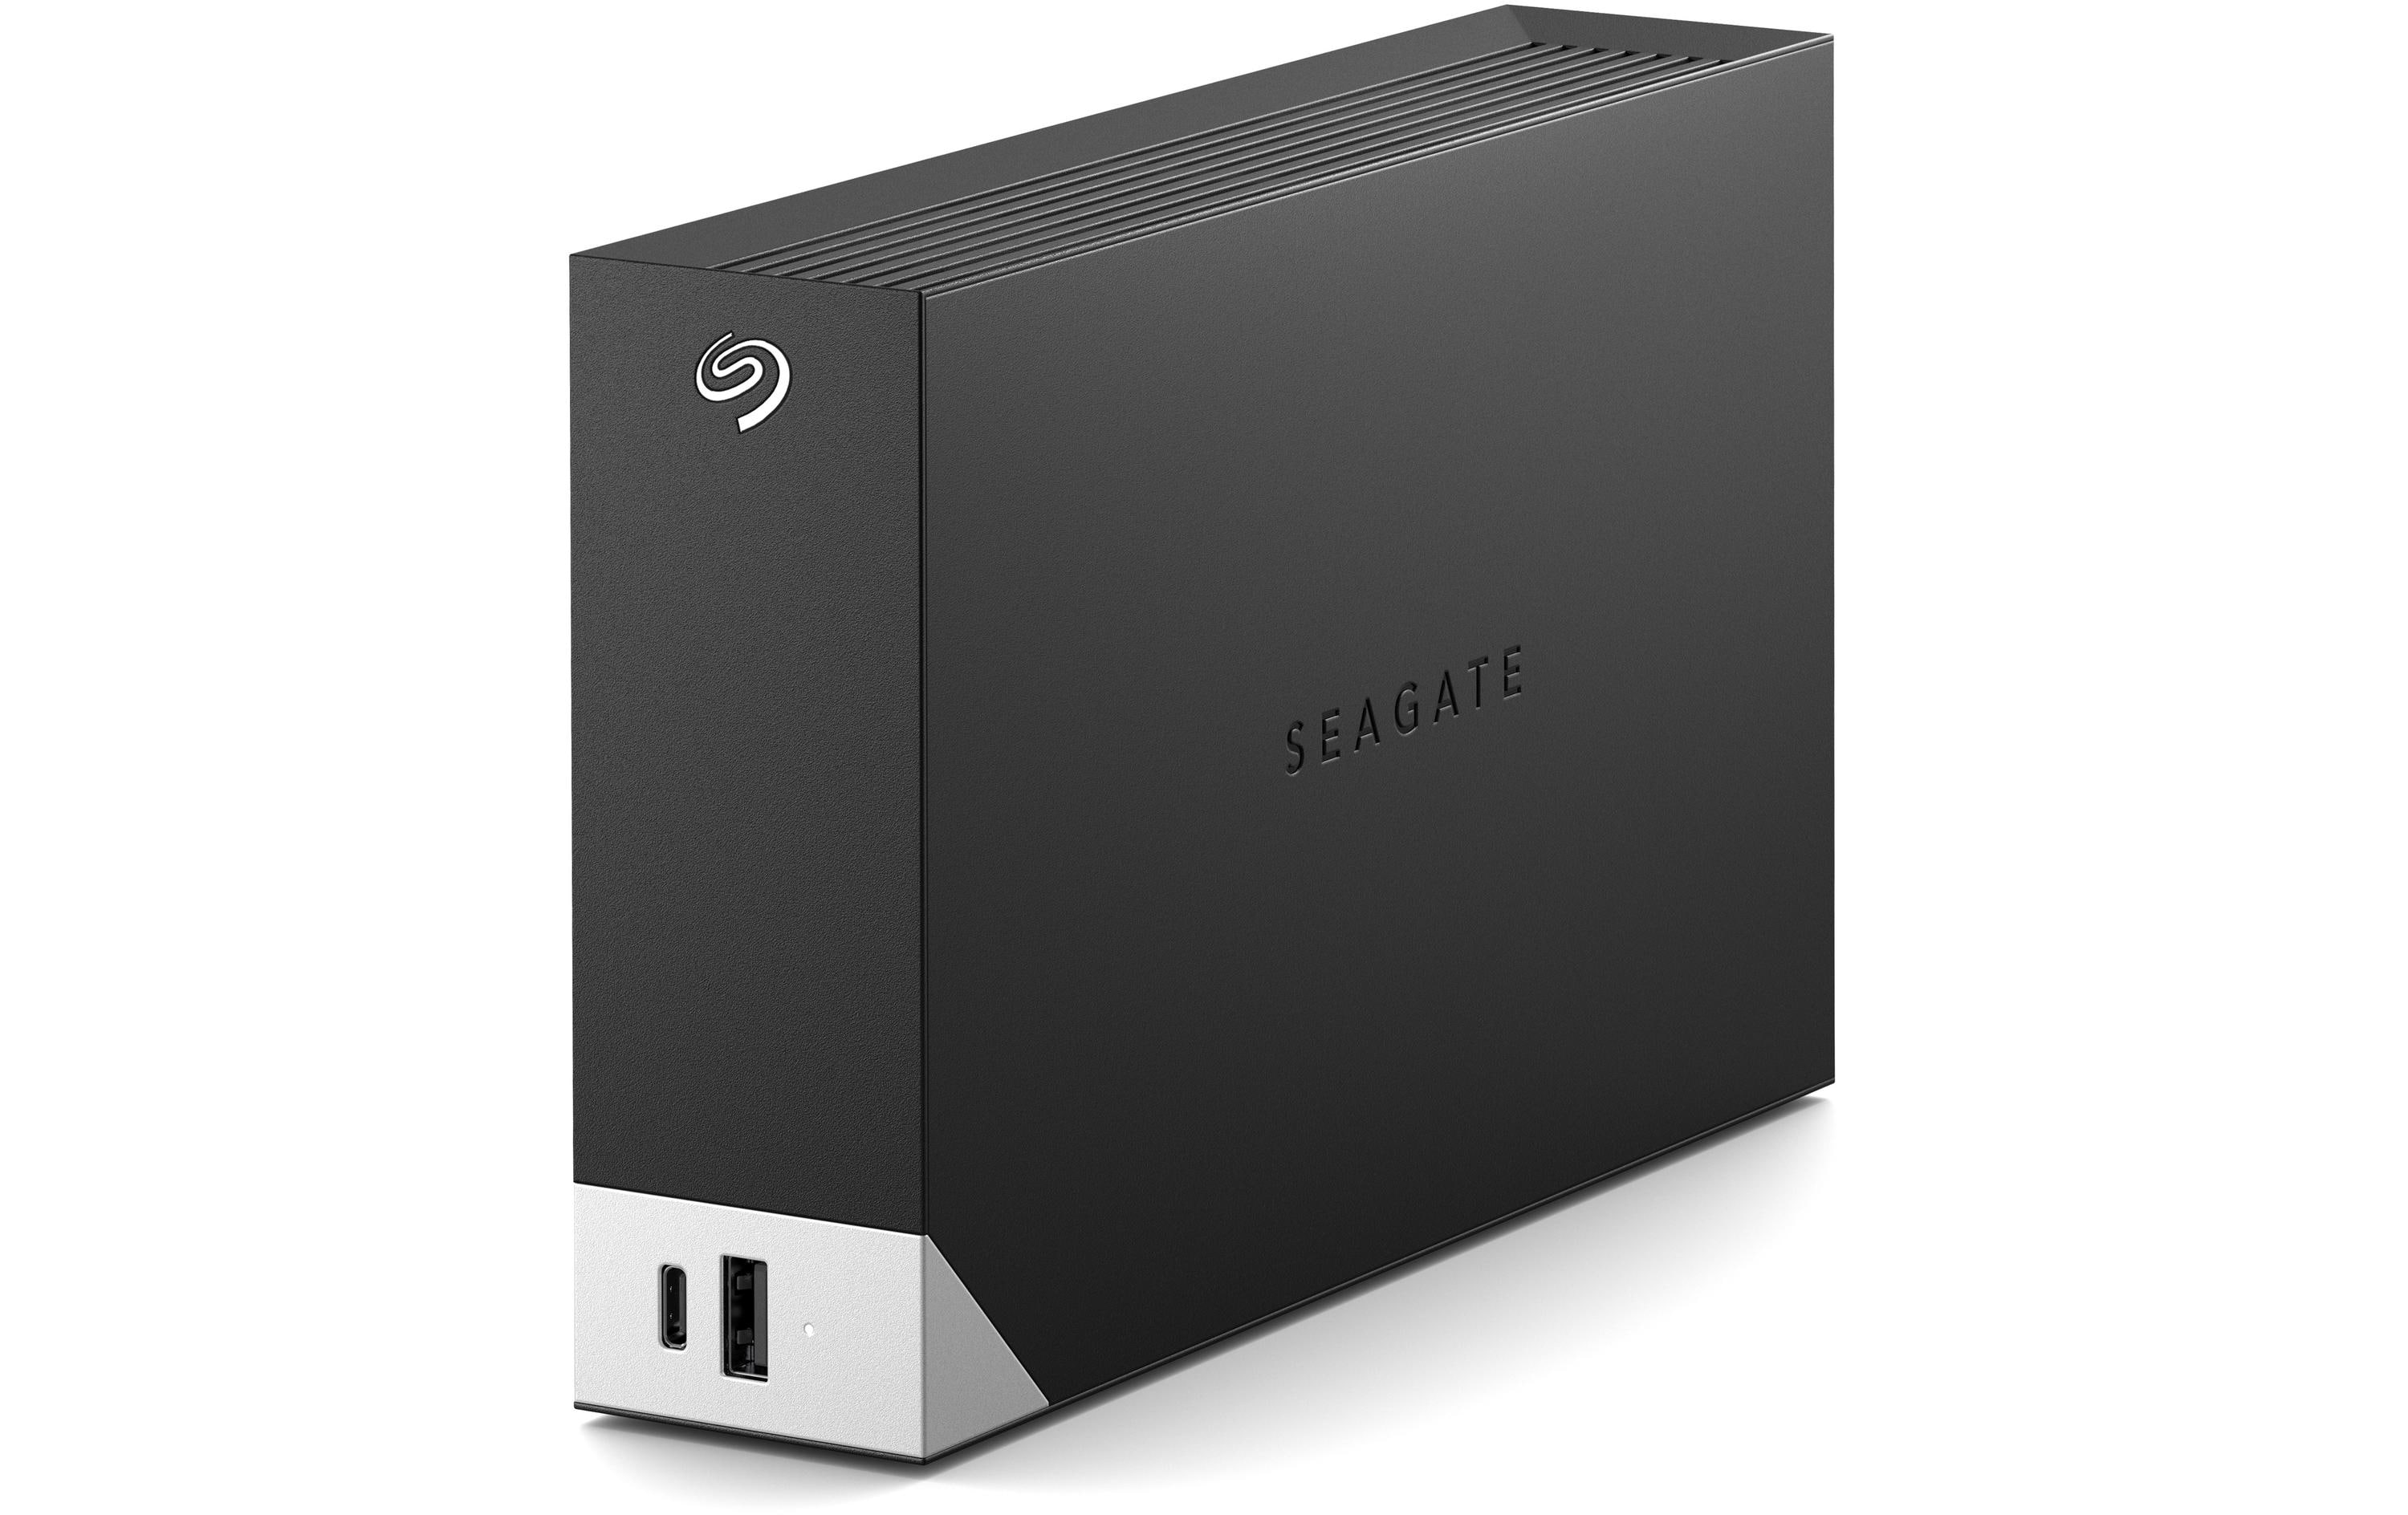 Seagate Externe Festplatte One Touch Hub 14 TB